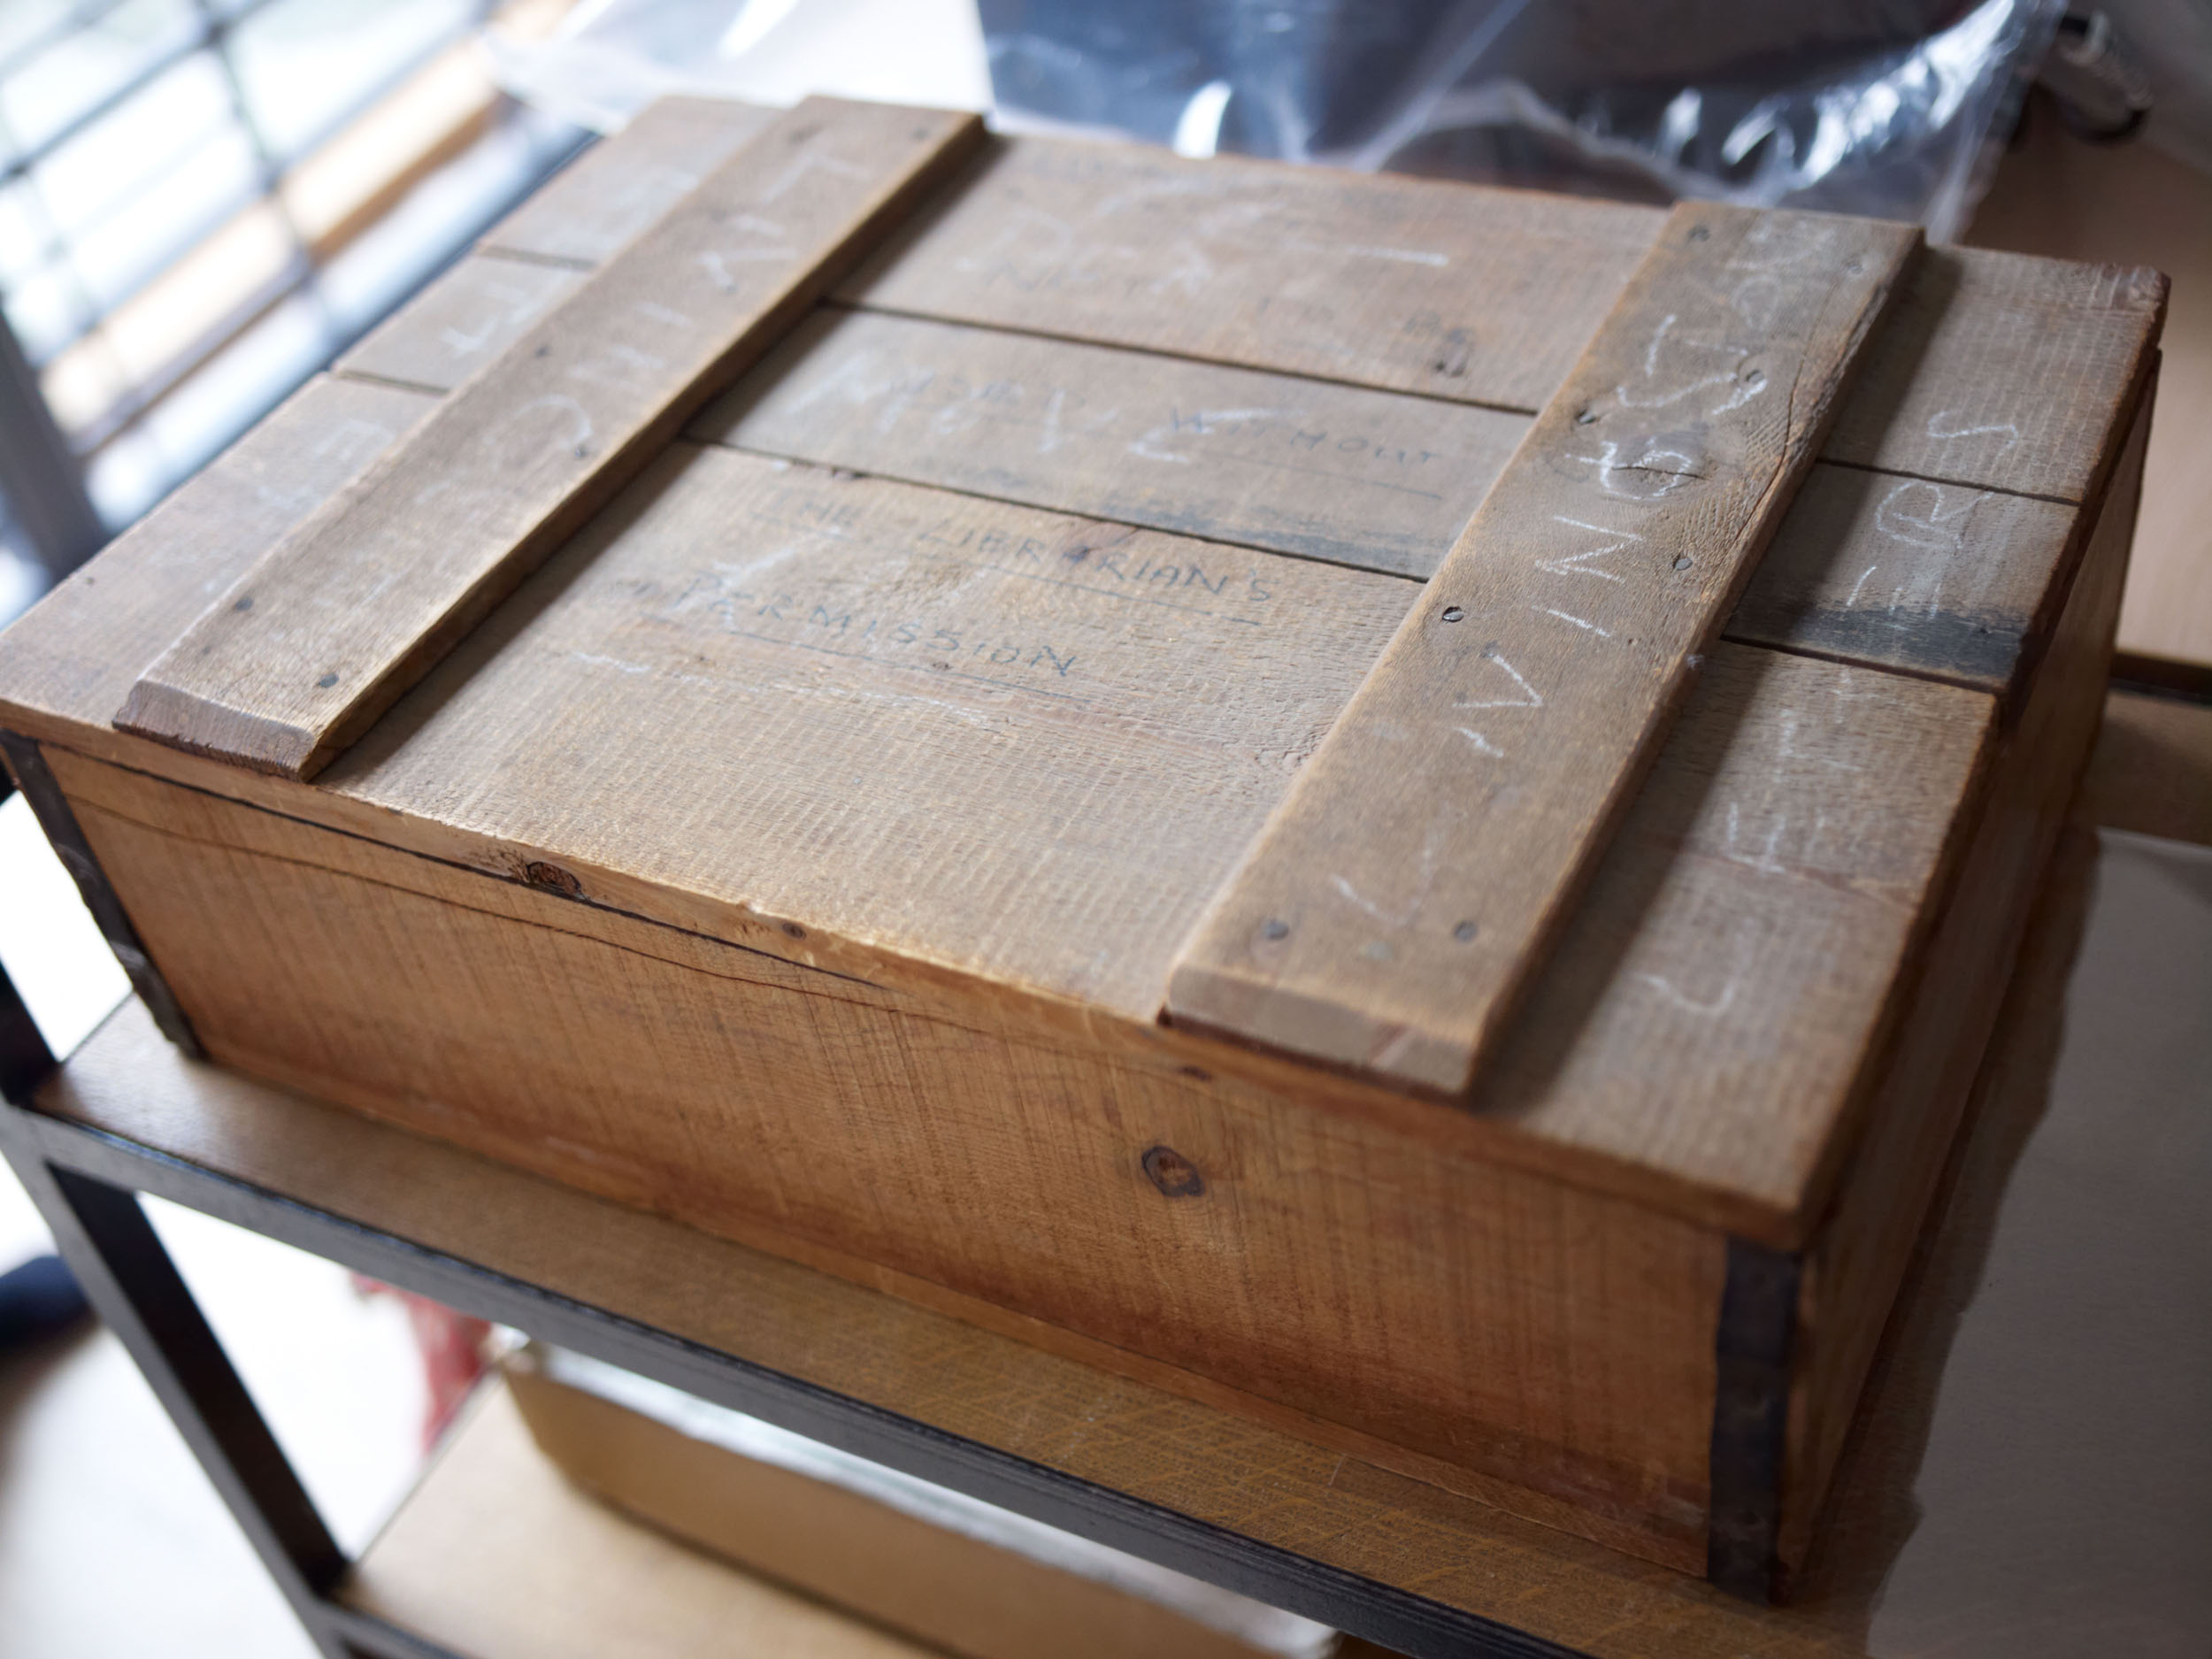 Wooden box of David Livingstone's letters at SOAS, University of London, c.2010. Copyright Livingstone Online. Creative Commons Attribution-NonCommercial 3.0 Unported (https://creativecommons.org/licenses/by-nc/3.0/).